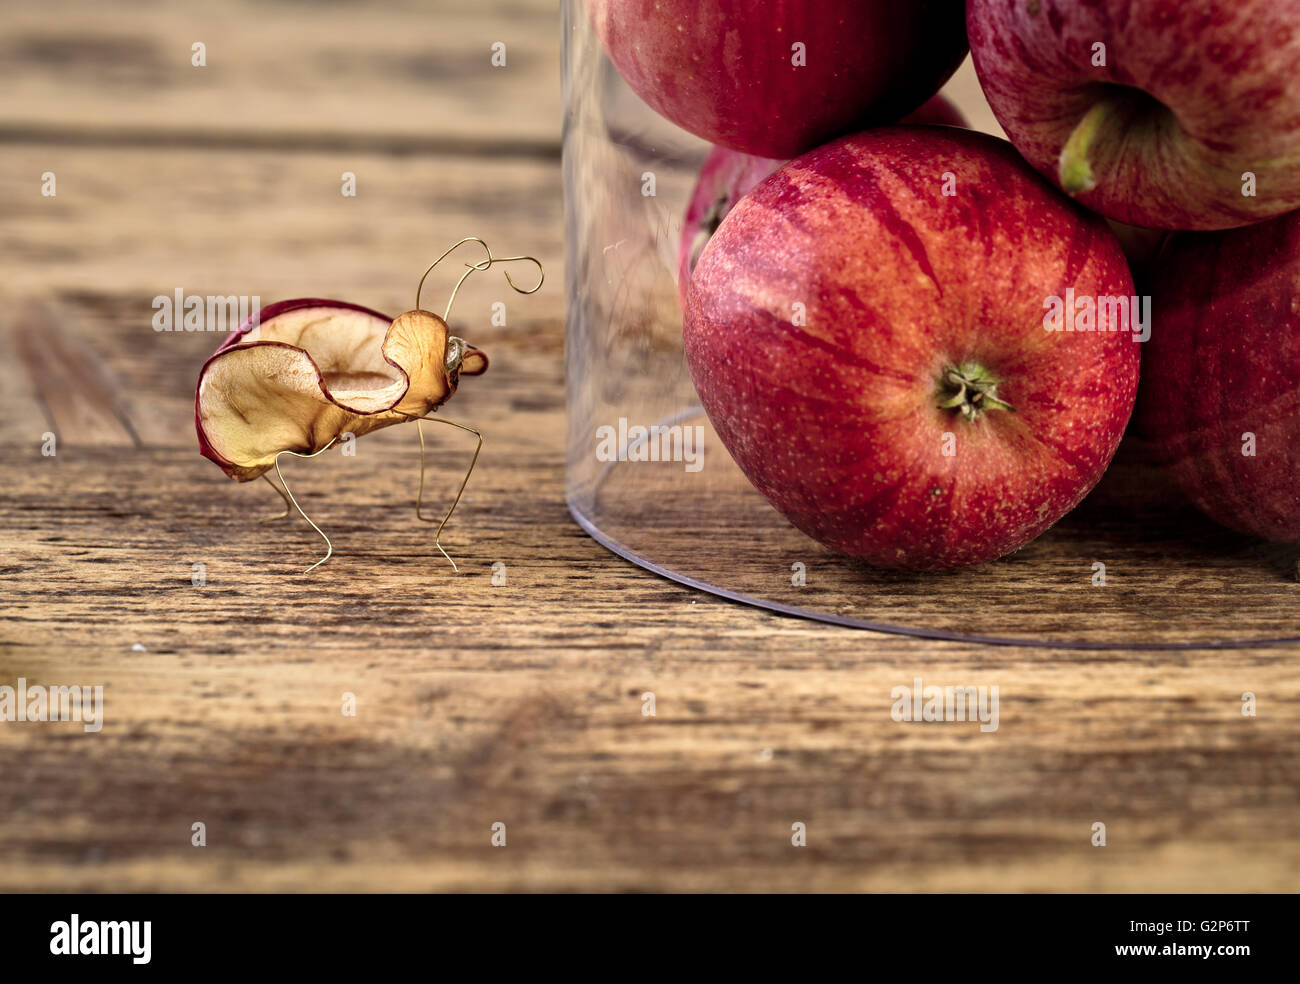 Miniature with Fruit Bugs inspecting Apples under glass dome Stock Photo